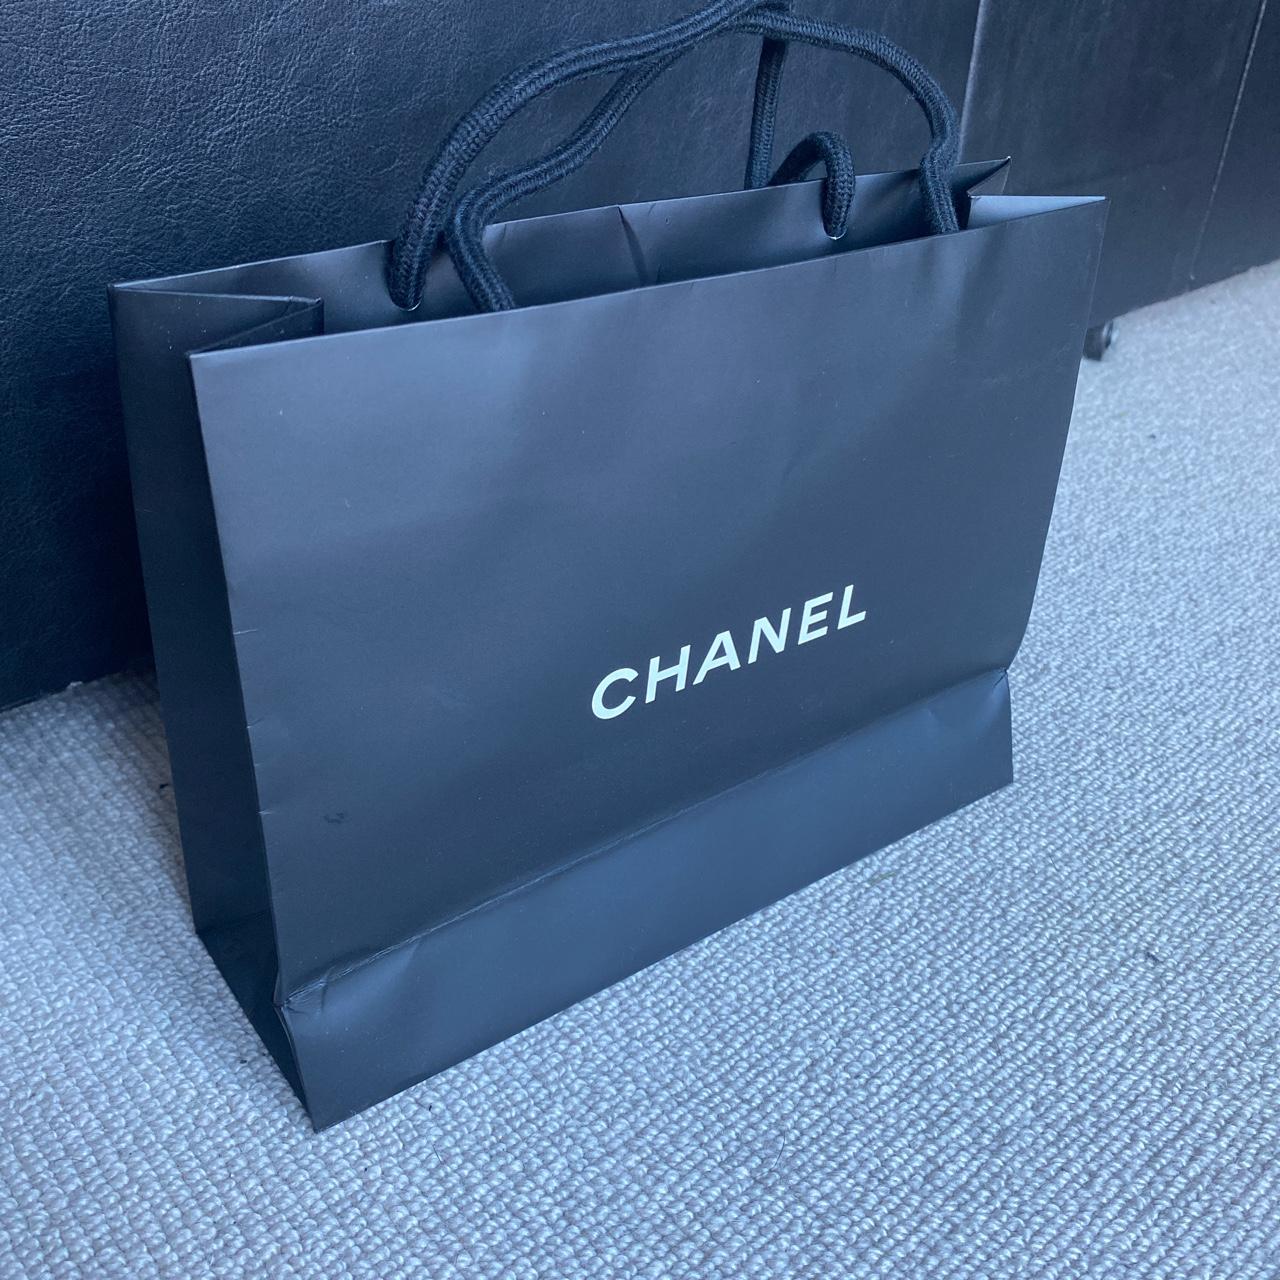 Chanel Gift Box & Bag Perfect to use for a gift, - Depop